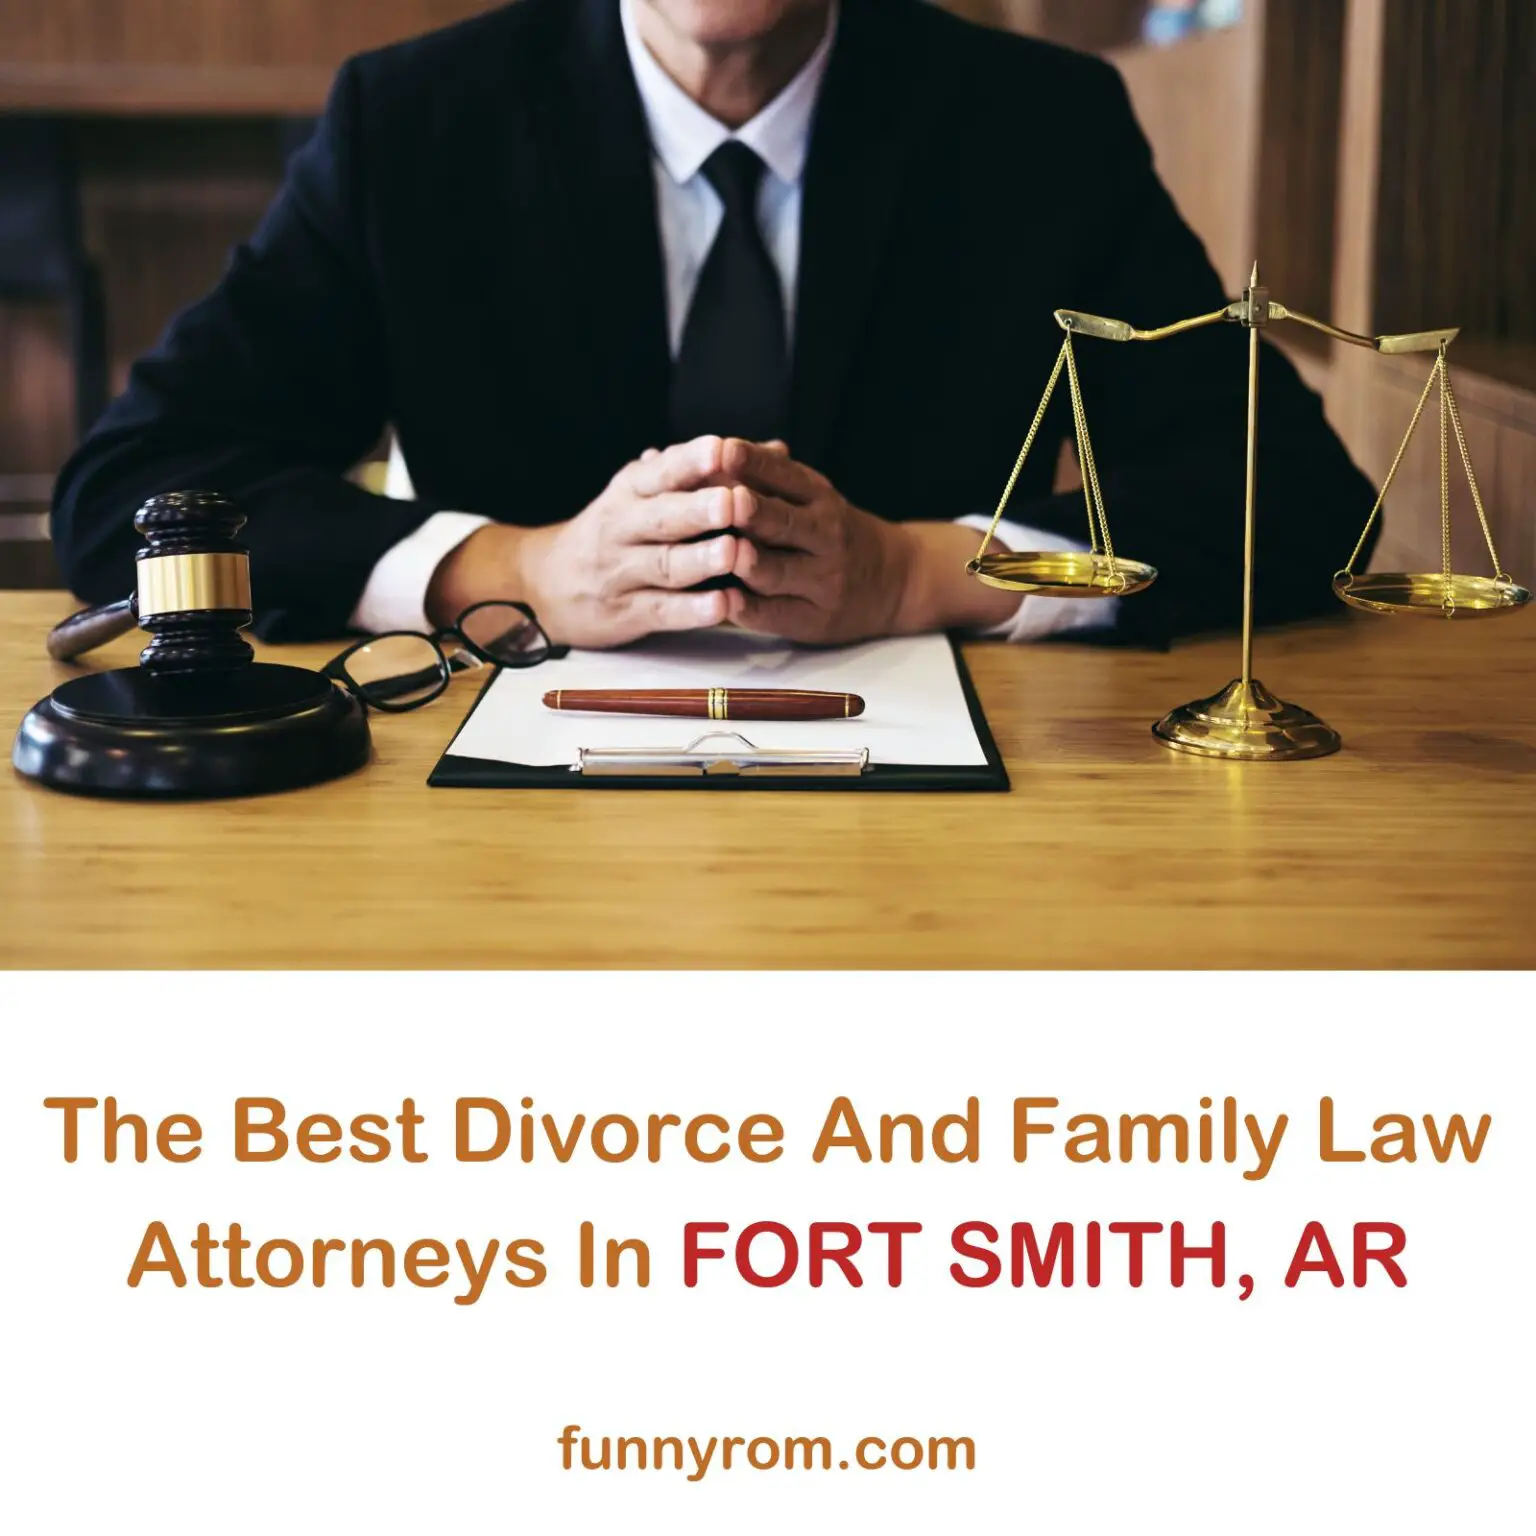 The Best Divorce And Family Law Attorneys In Fort Smith, AR